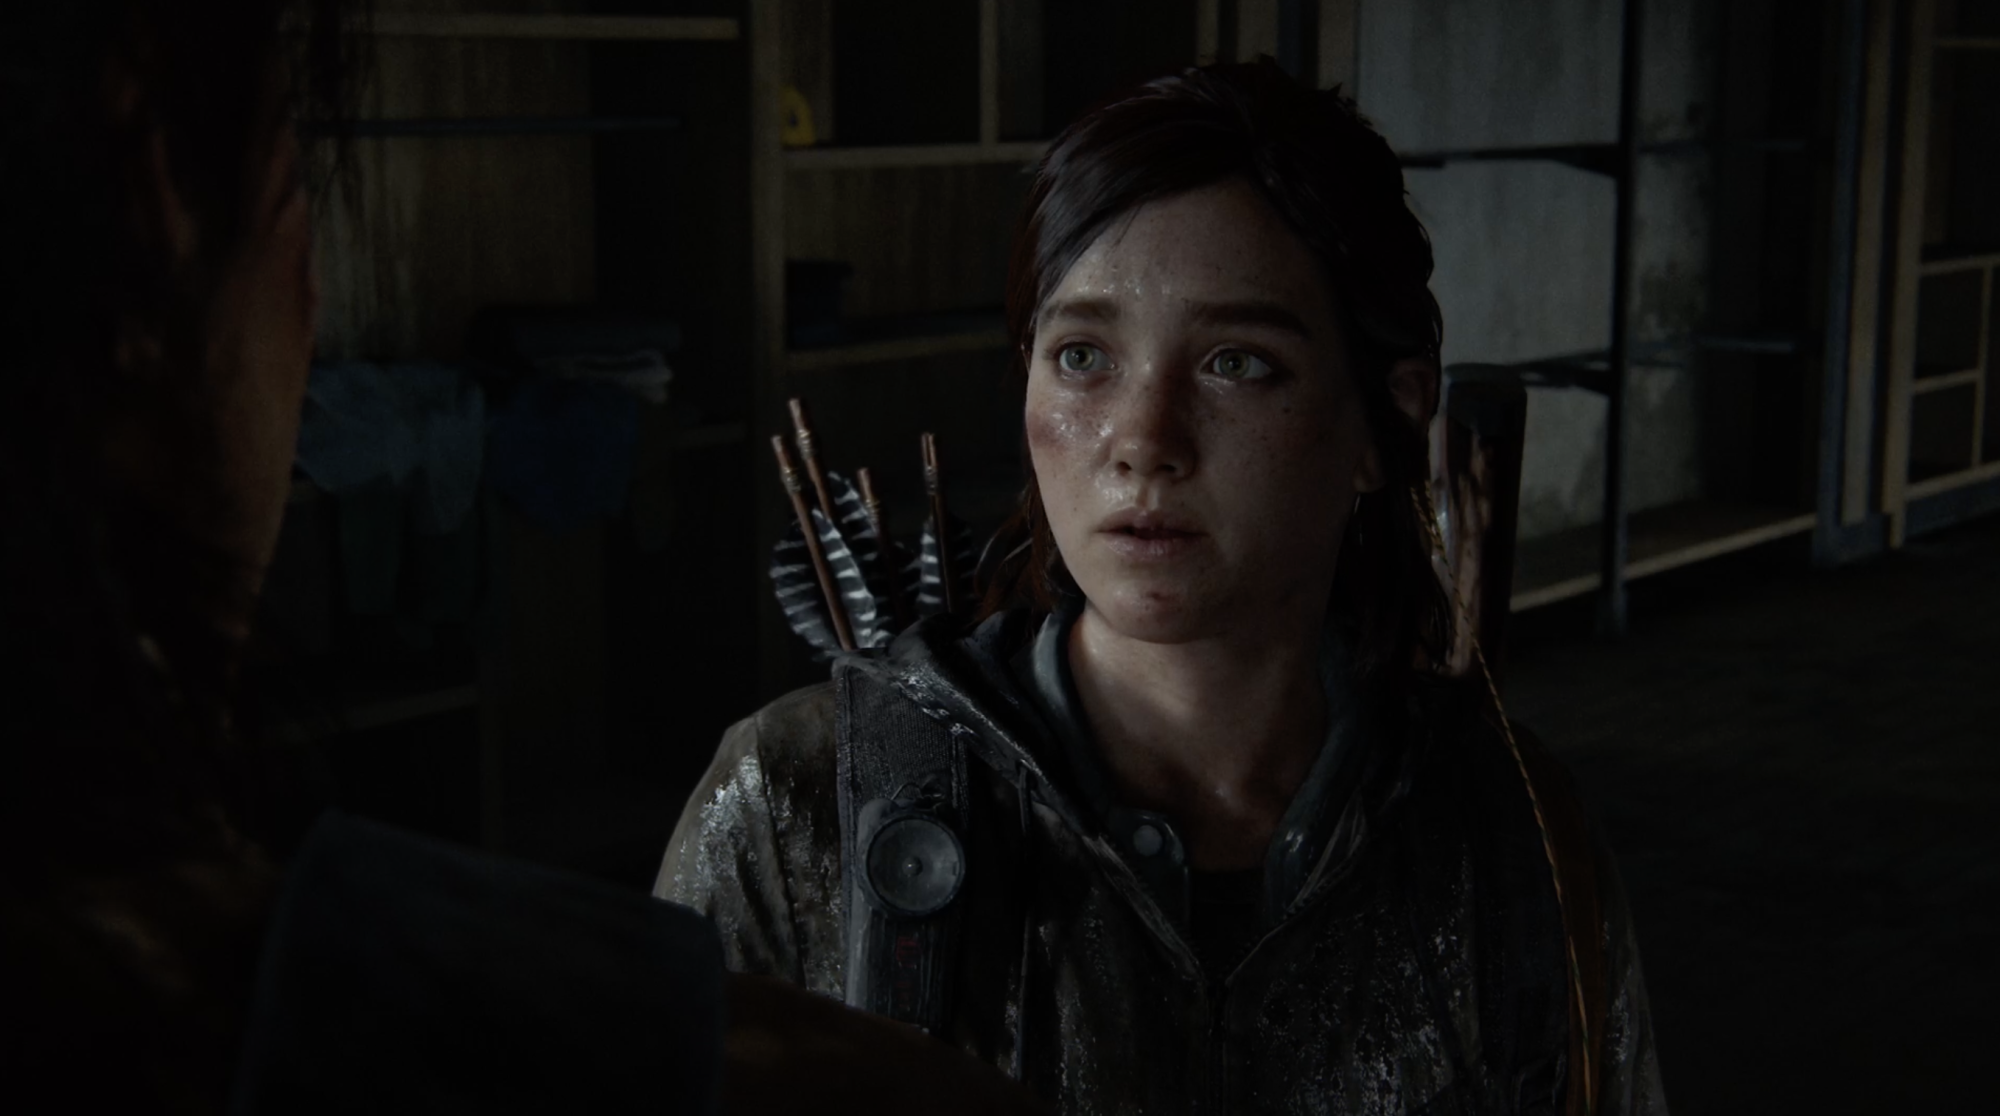 The Last Of Us Parte II Remastered